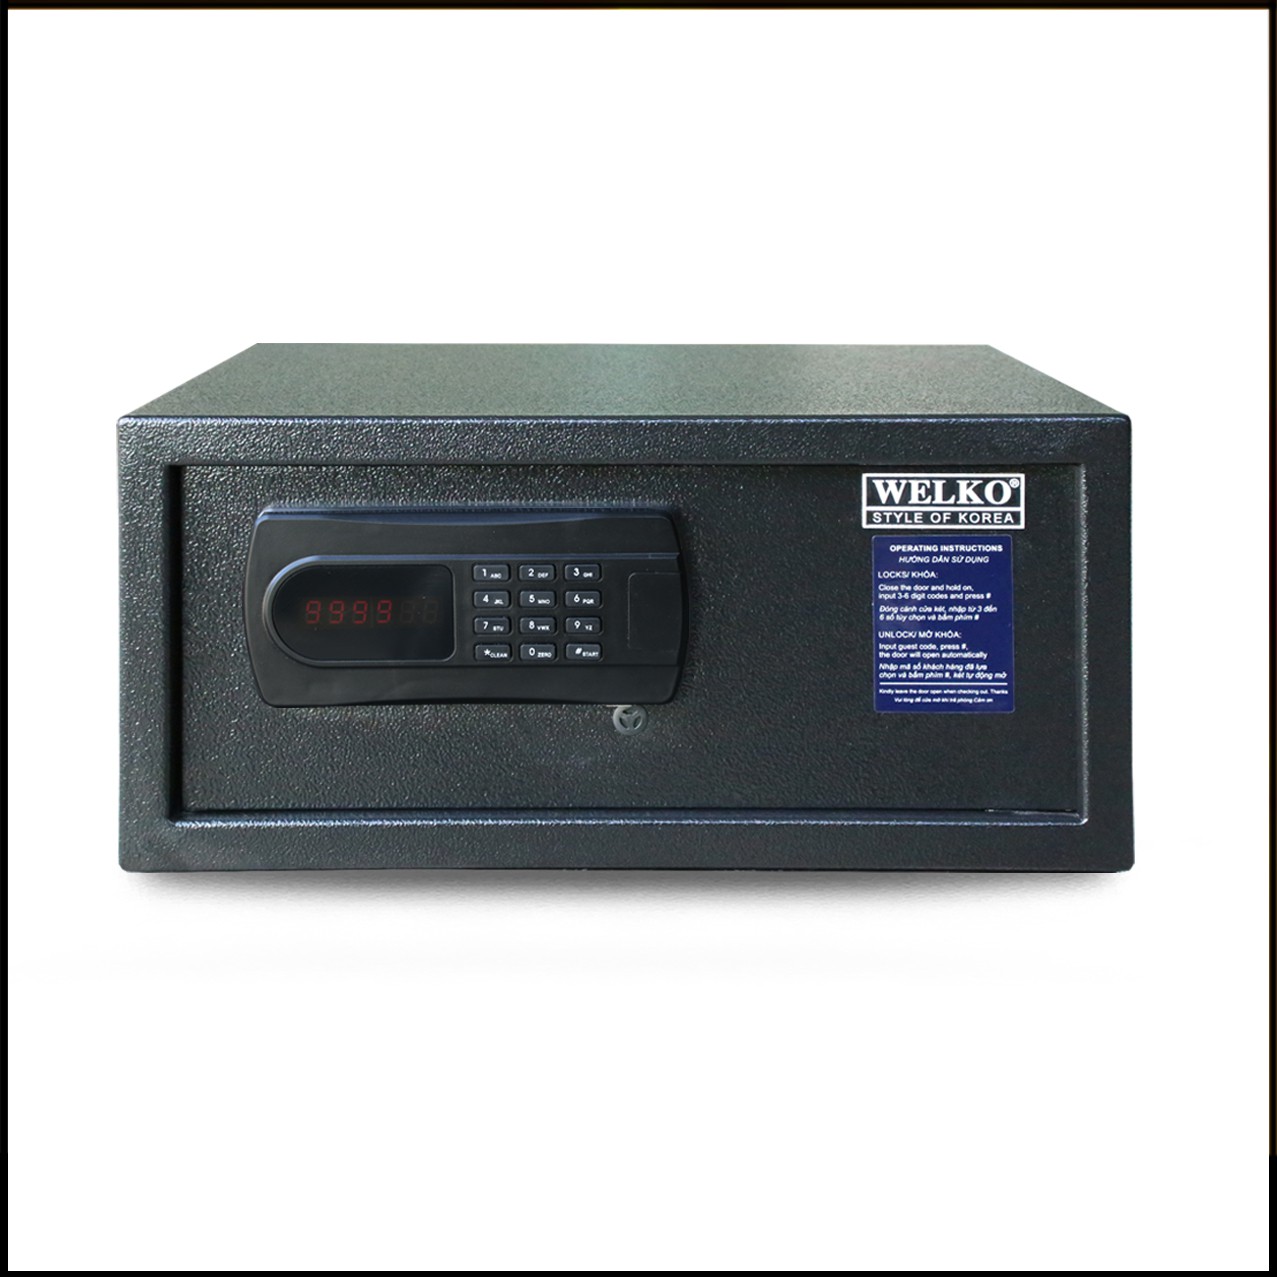 Safes in Hotel Wholesale Suppliers